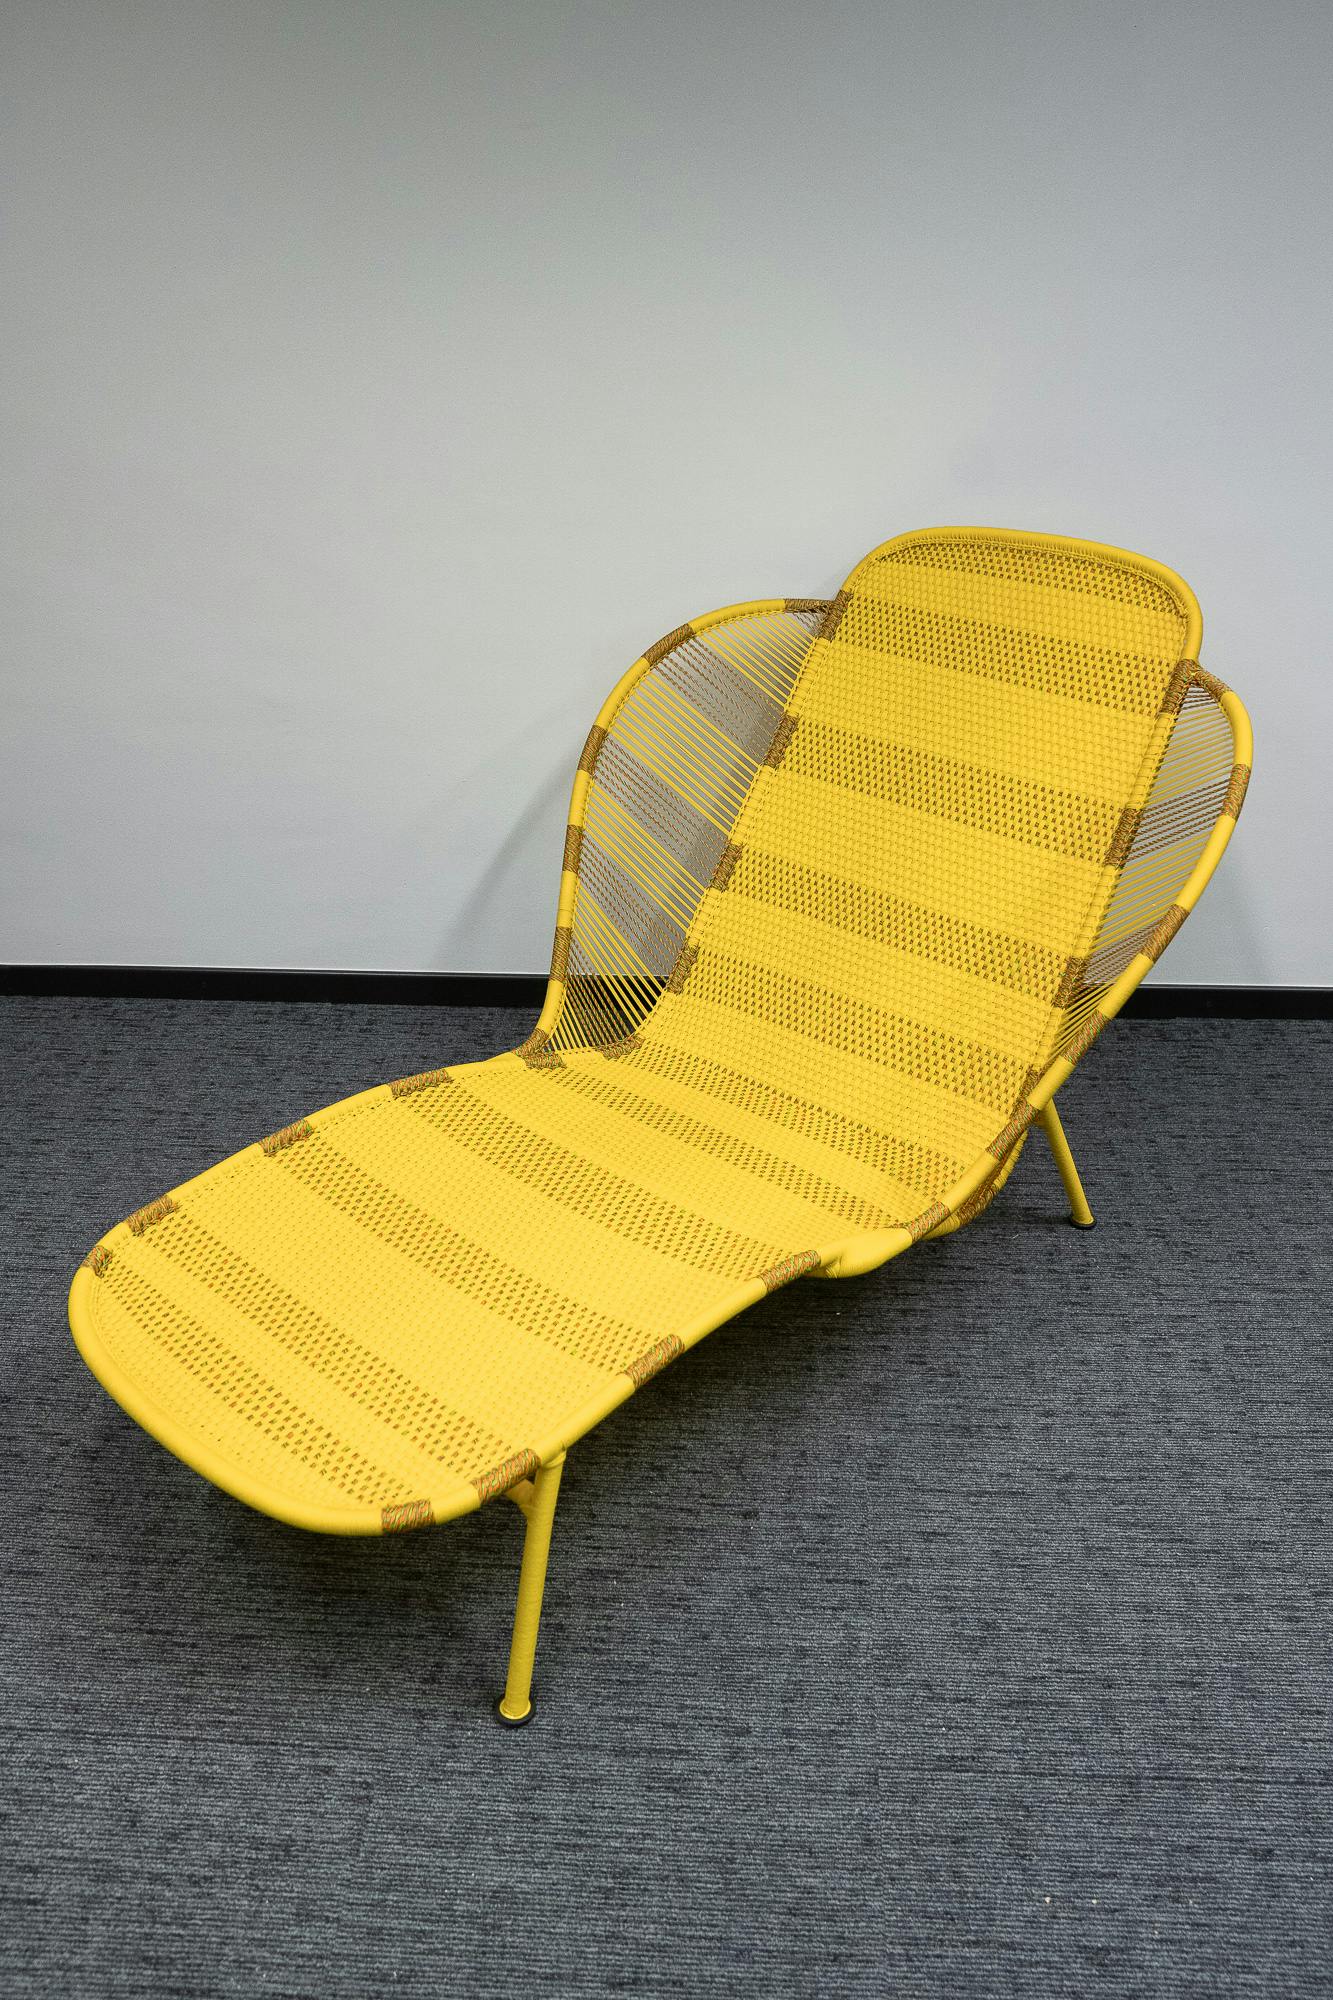 Transat / Long chair yellow woven MOROSO - Second hand quality "Chairs" - Relieve Furniture